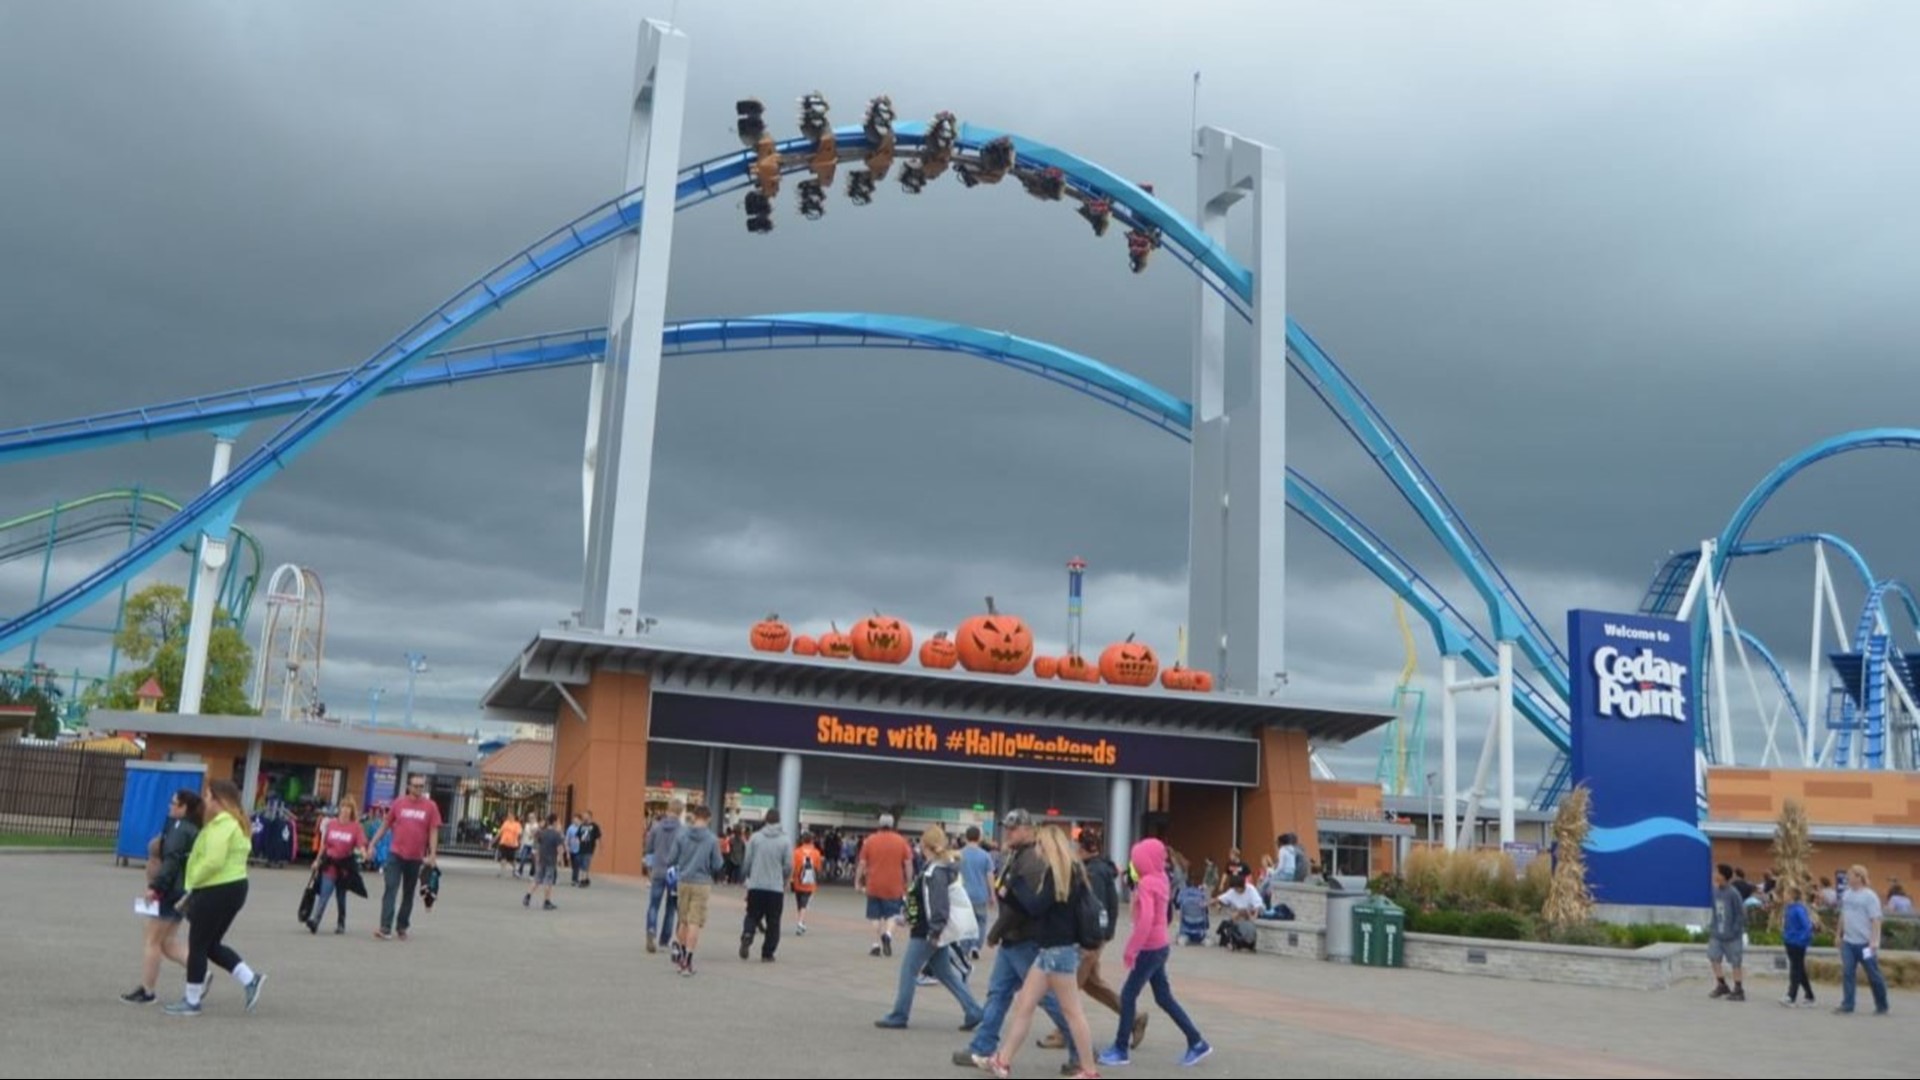 The traditional HalloWeekends event was canceled at Cedar Point in 2020 due to COVID concerns. So will it be back this year? We asked Tony Clark for an update.